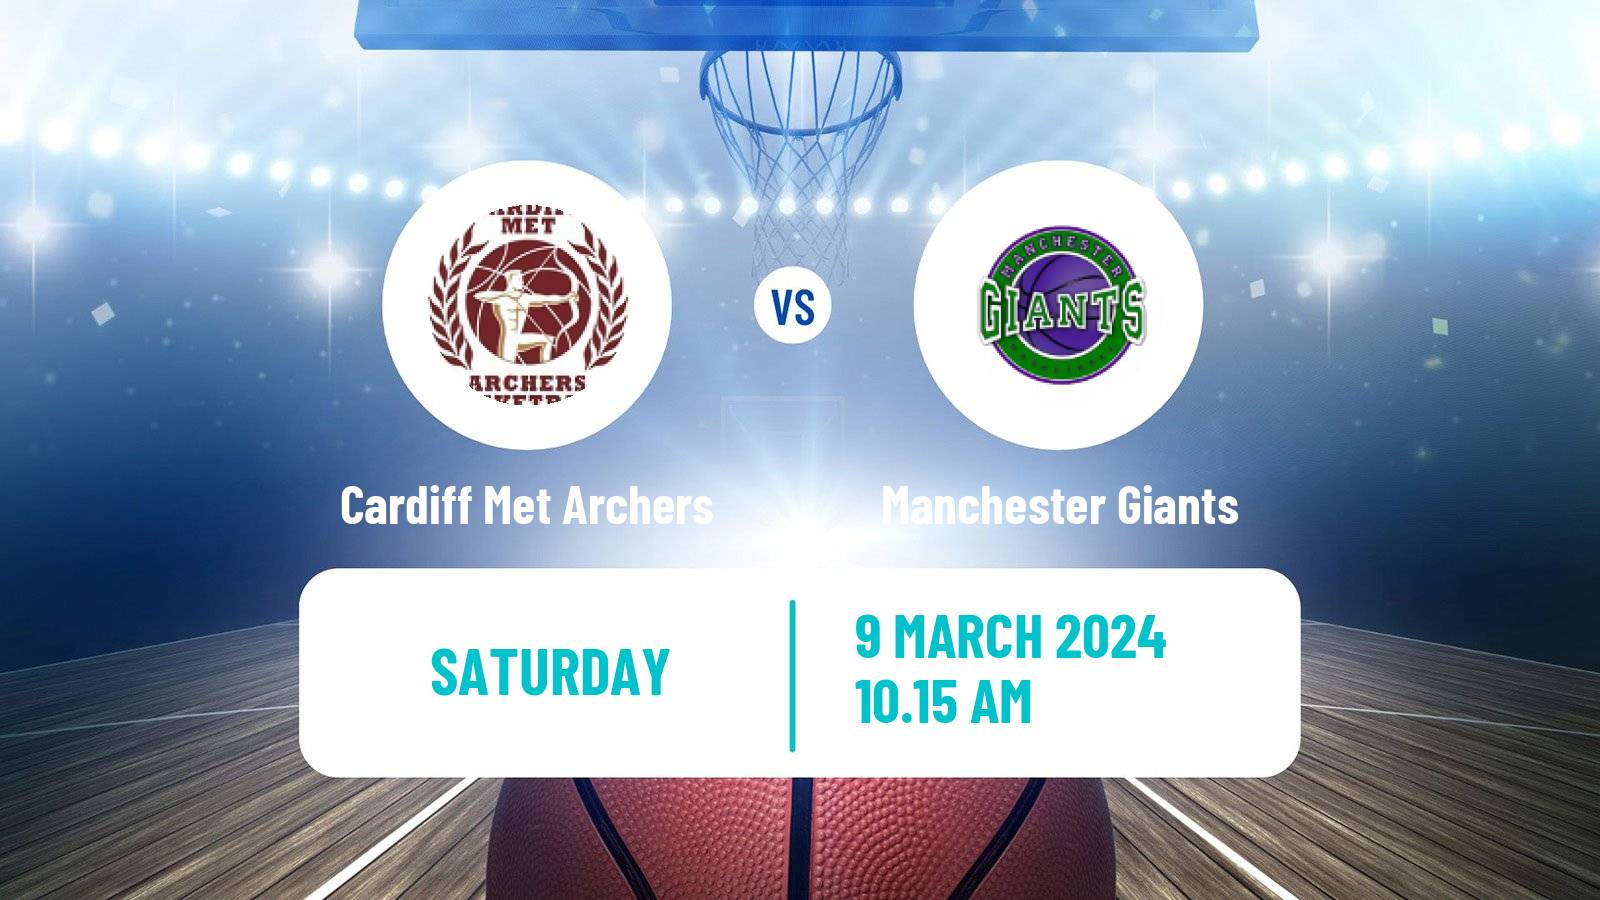 Basketball British WBBL Cardiff Met Archers - Manchester Giants